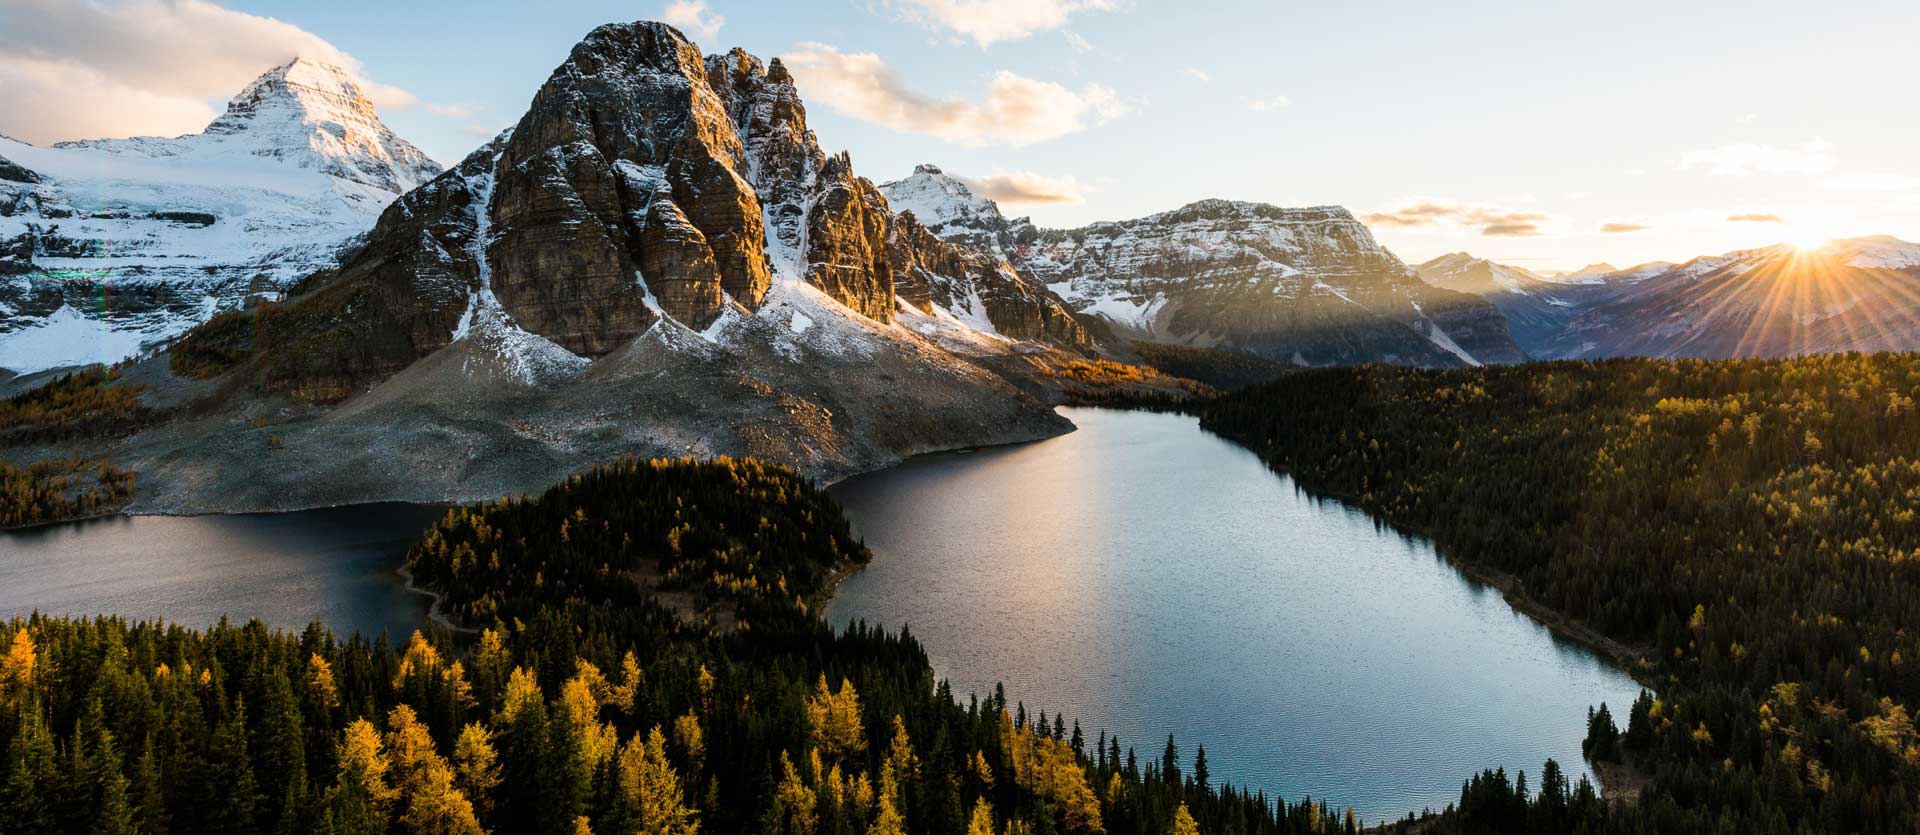 Two lakes in front of steep mountains at sunset